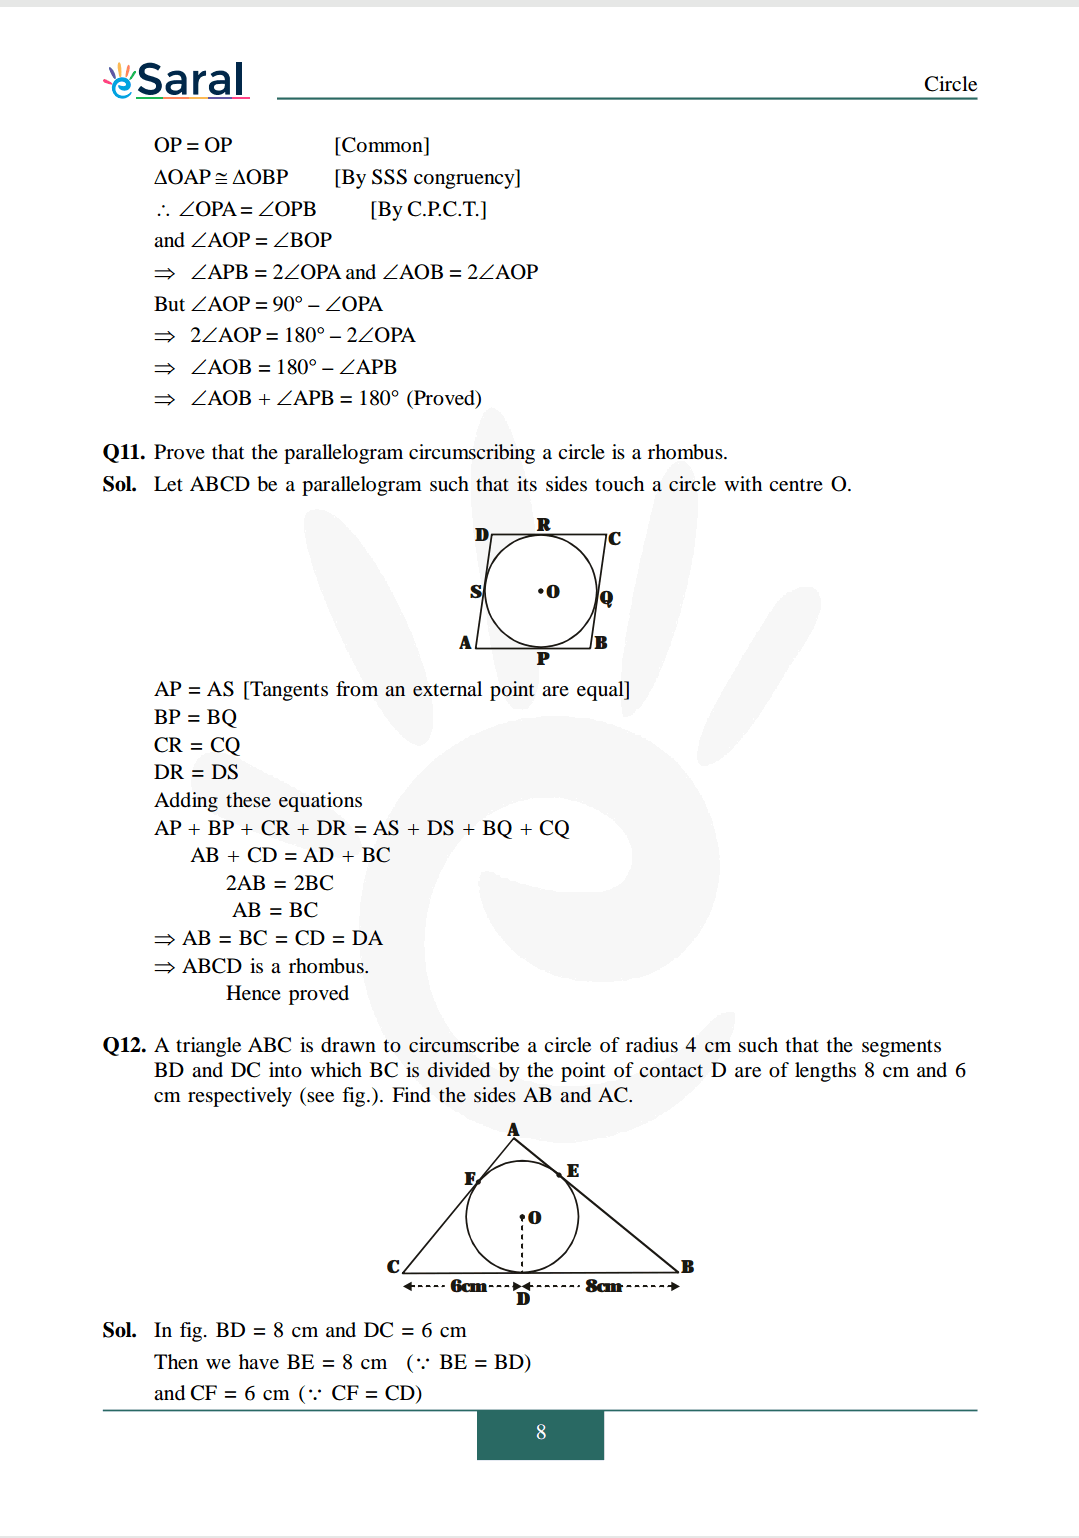 Class 10 Maths Chapter 10 exercise 10.2 solutions Image 8